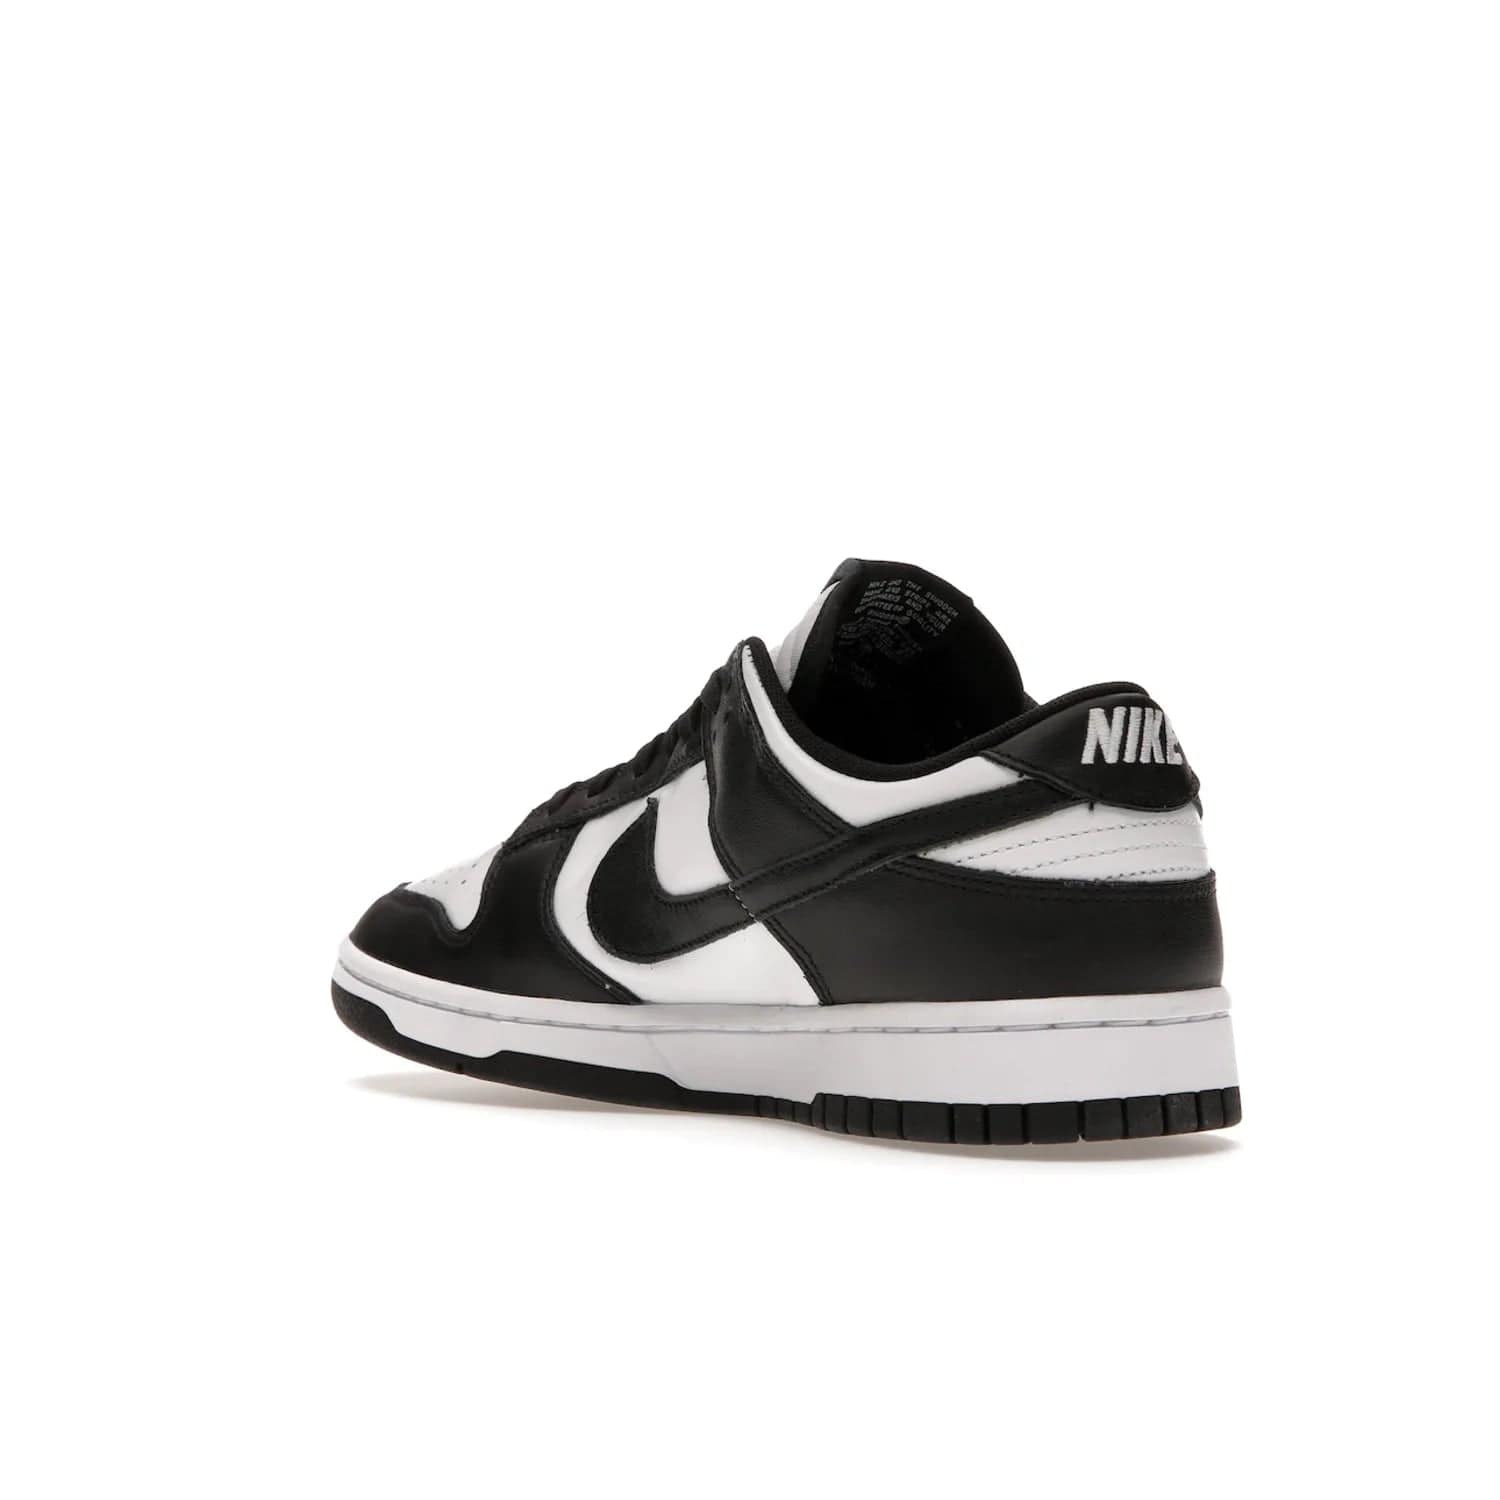 Nike Dunk Low Retro White Black Panda (2021) - Image 24 - Only at www.BallersClubKickz.com - Shop the Nike Dunk Low Retro White Black for classic styling featuring white leather with black leather overlays and classic Nike branding. Released in 2021, this timeless design offers a white midsole and black outsole for a stylish look. Shop all the Nike Dunks & rock this classic look.